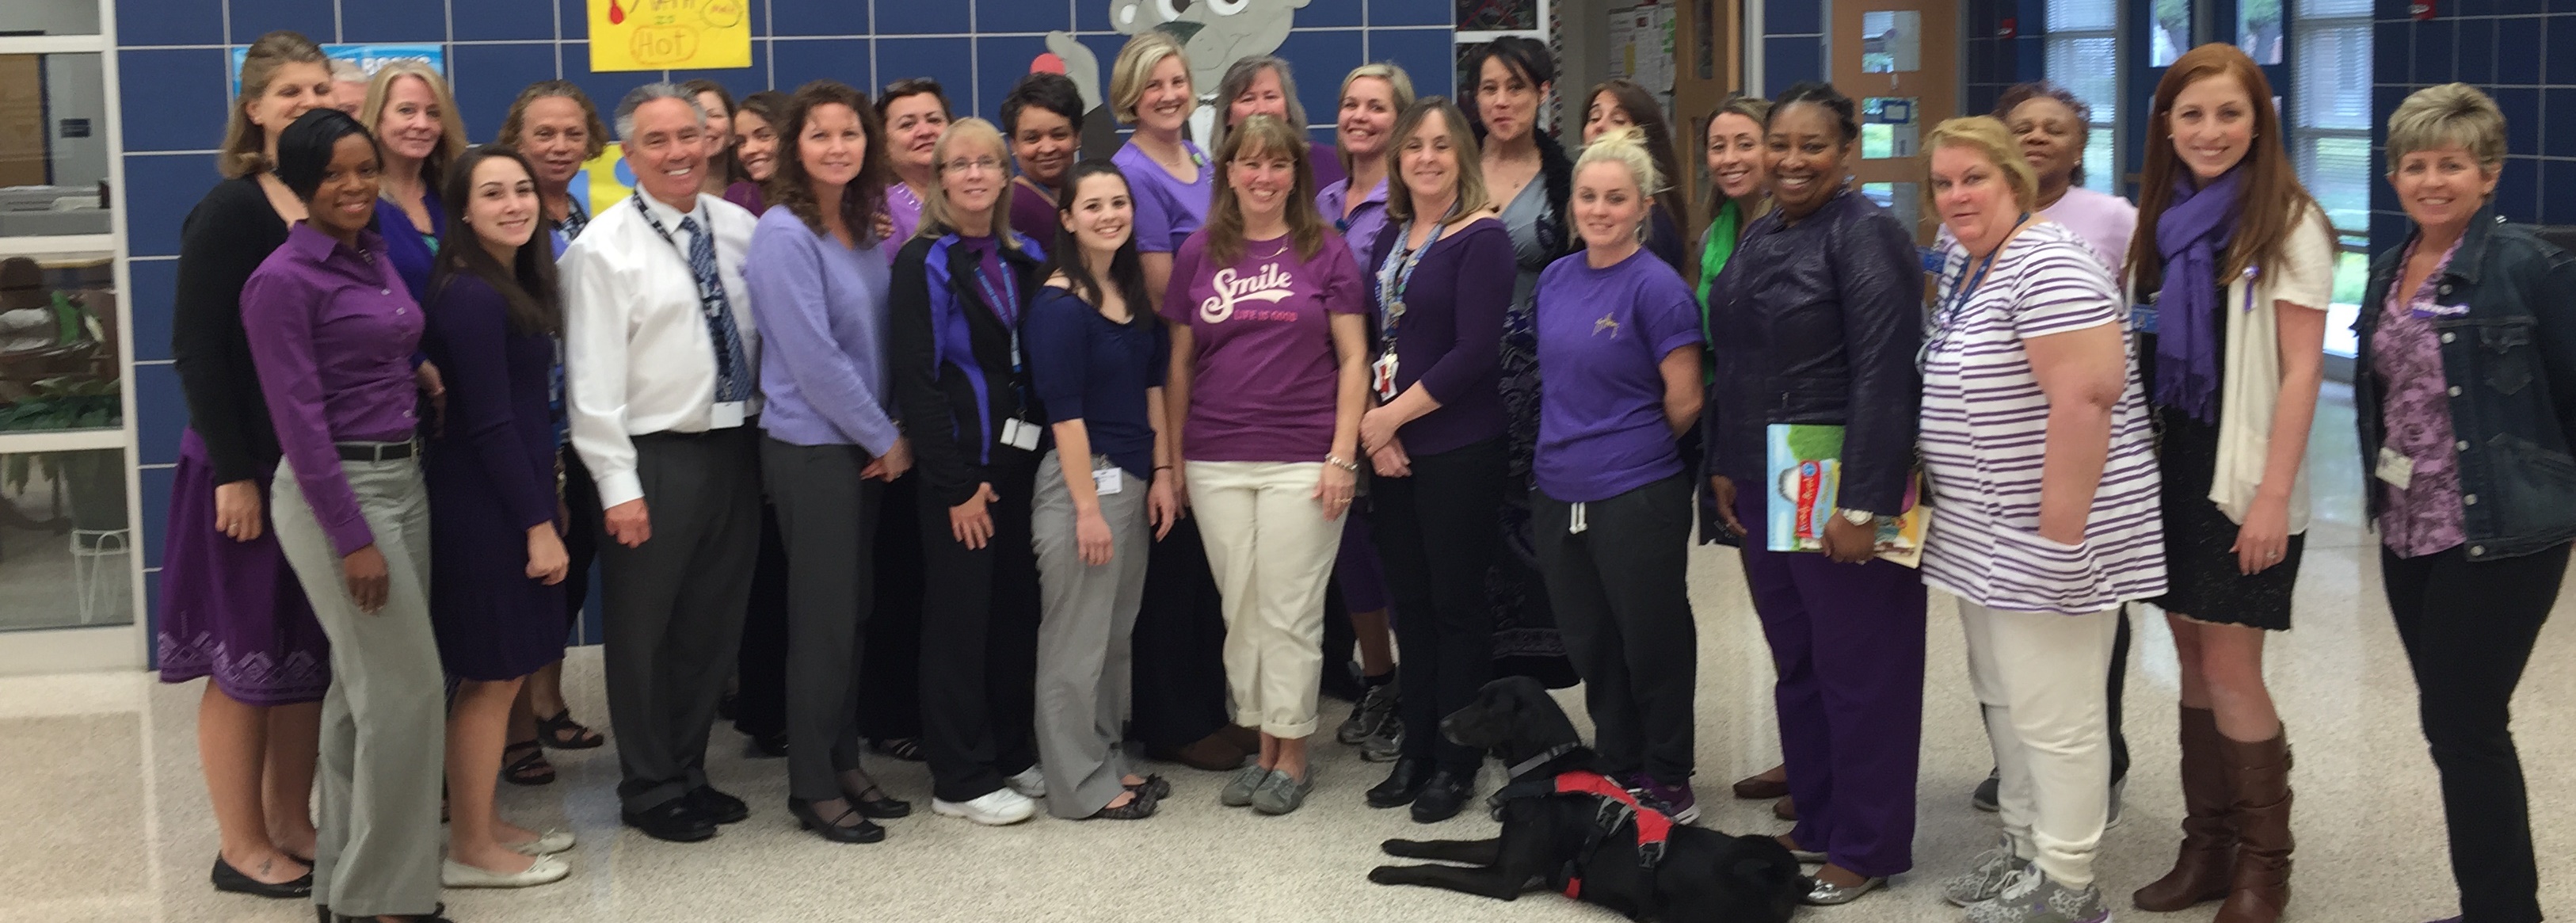 Pembroke Meadows Elementary School Purpled Up! for our Military Kids to show its support and gratitude. 